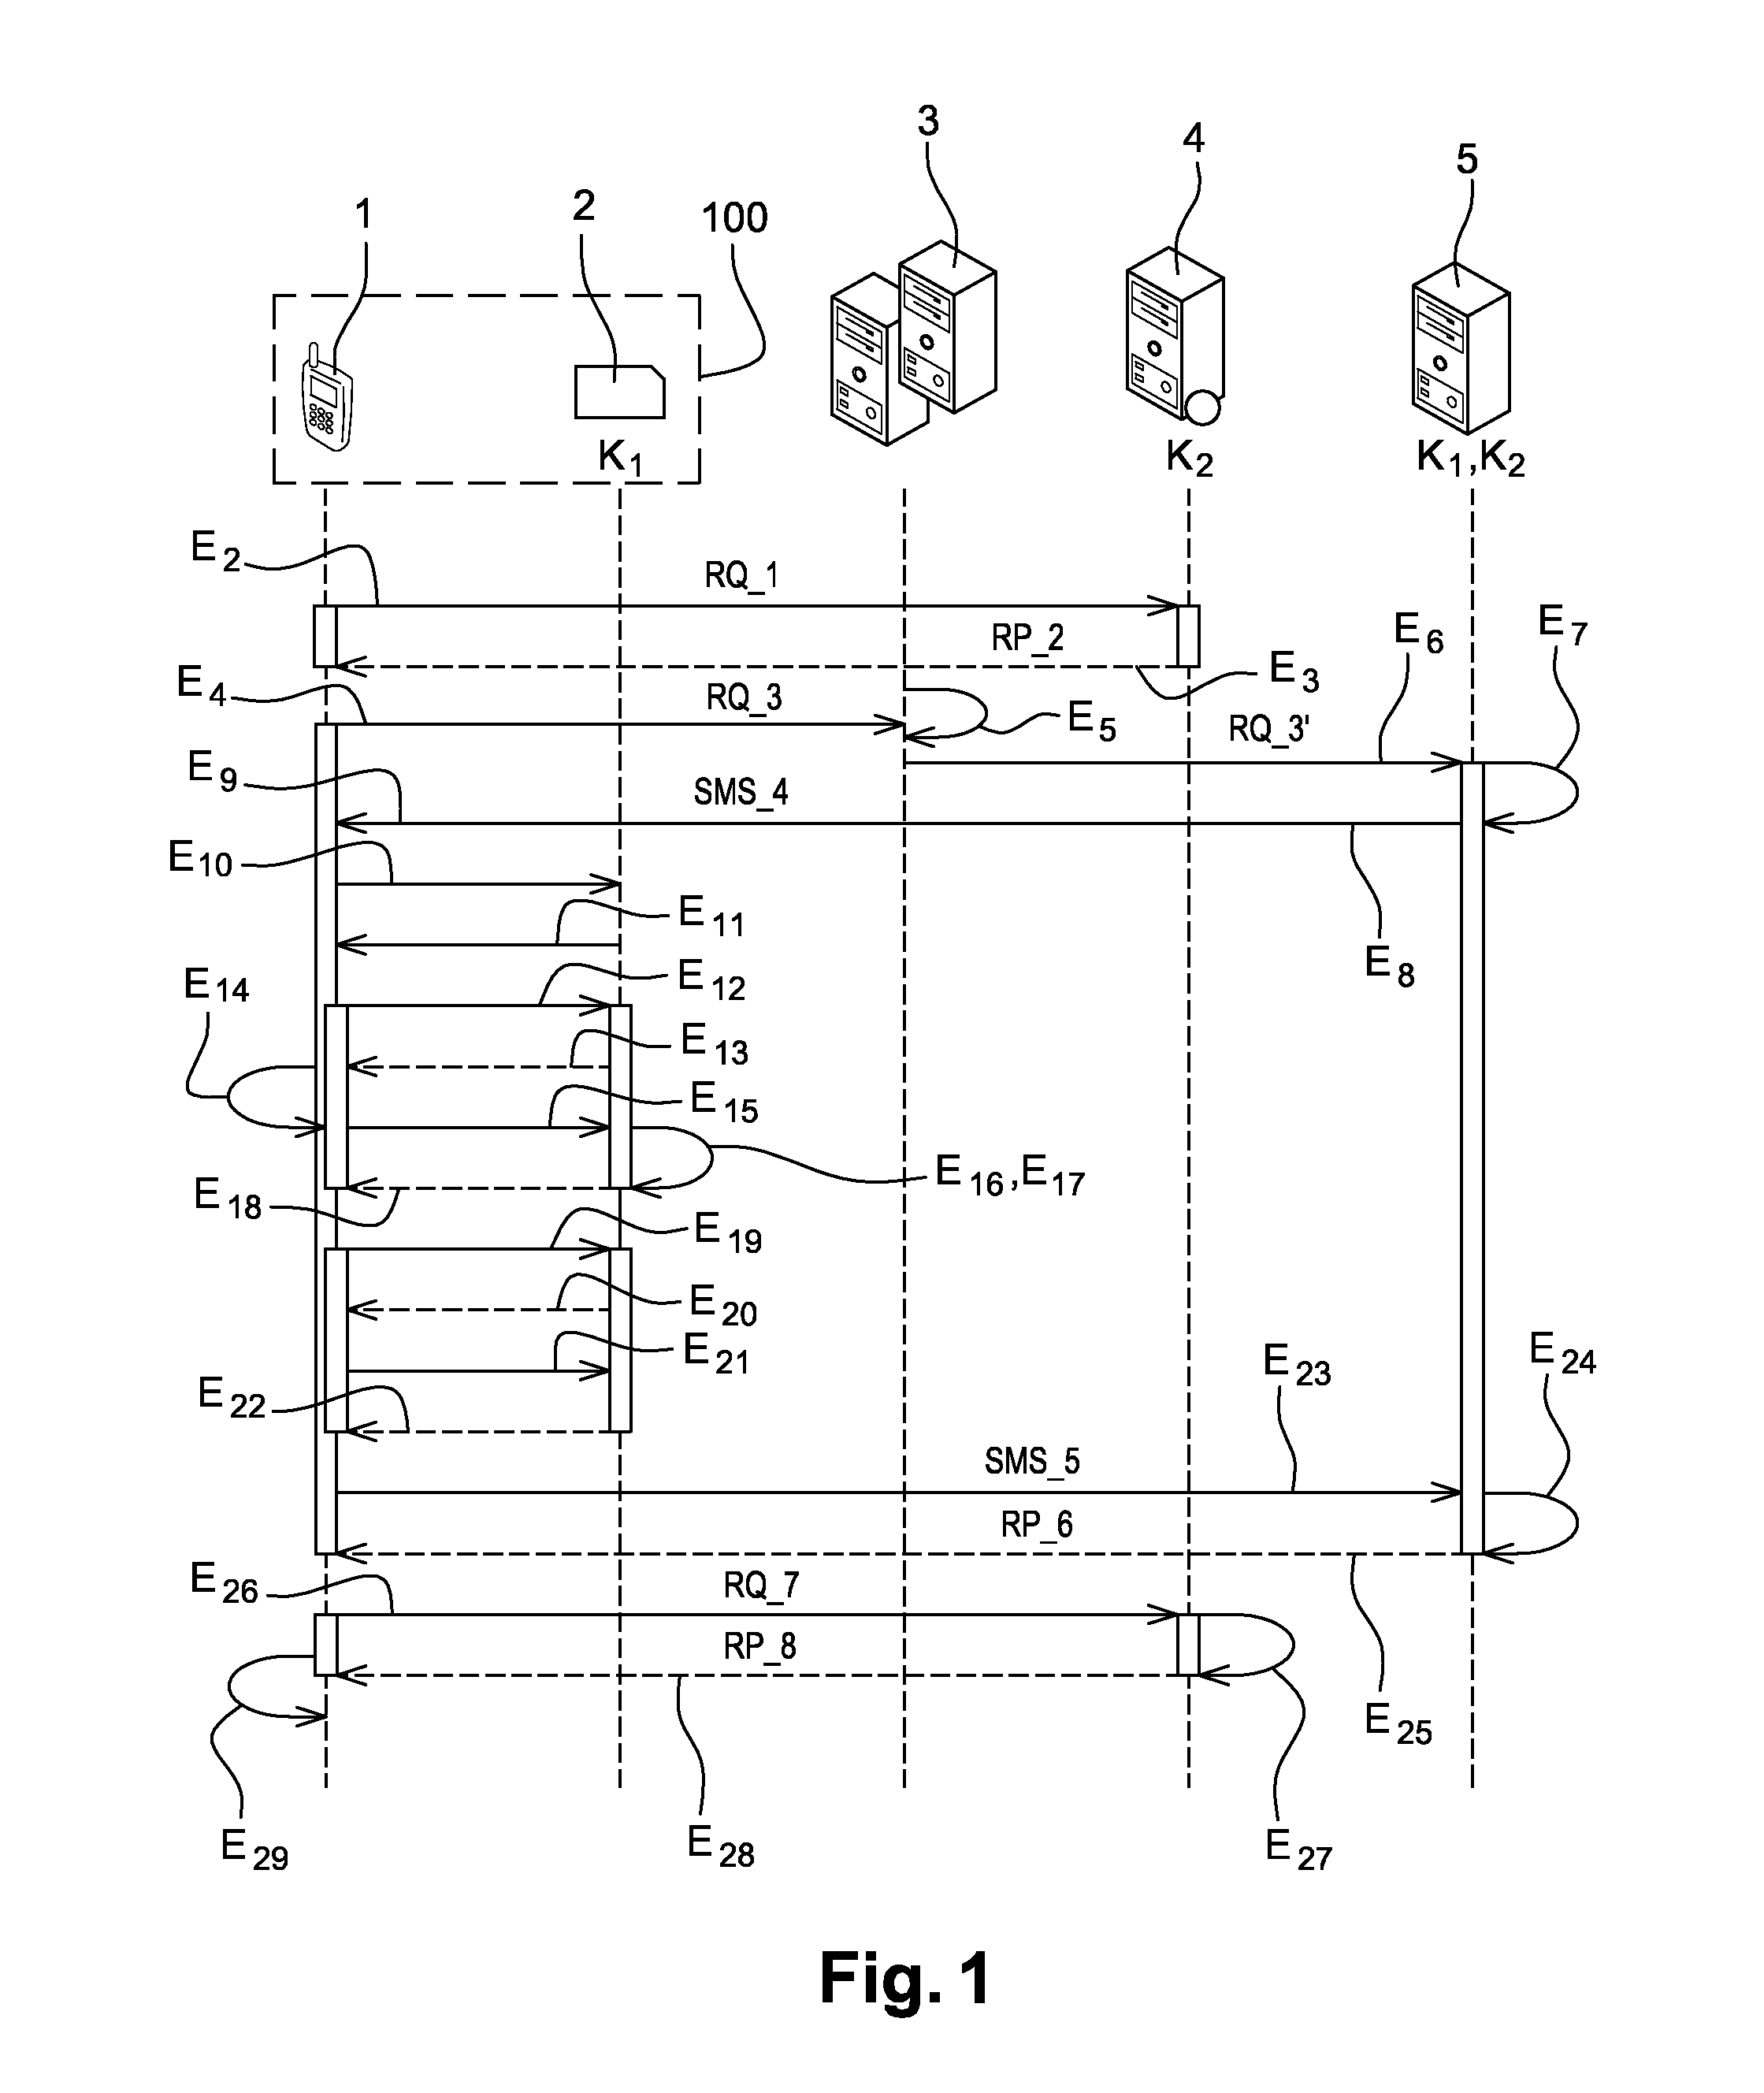 Method of using a user device for remote payment of a shopping basket on a merchant server, and an associated system